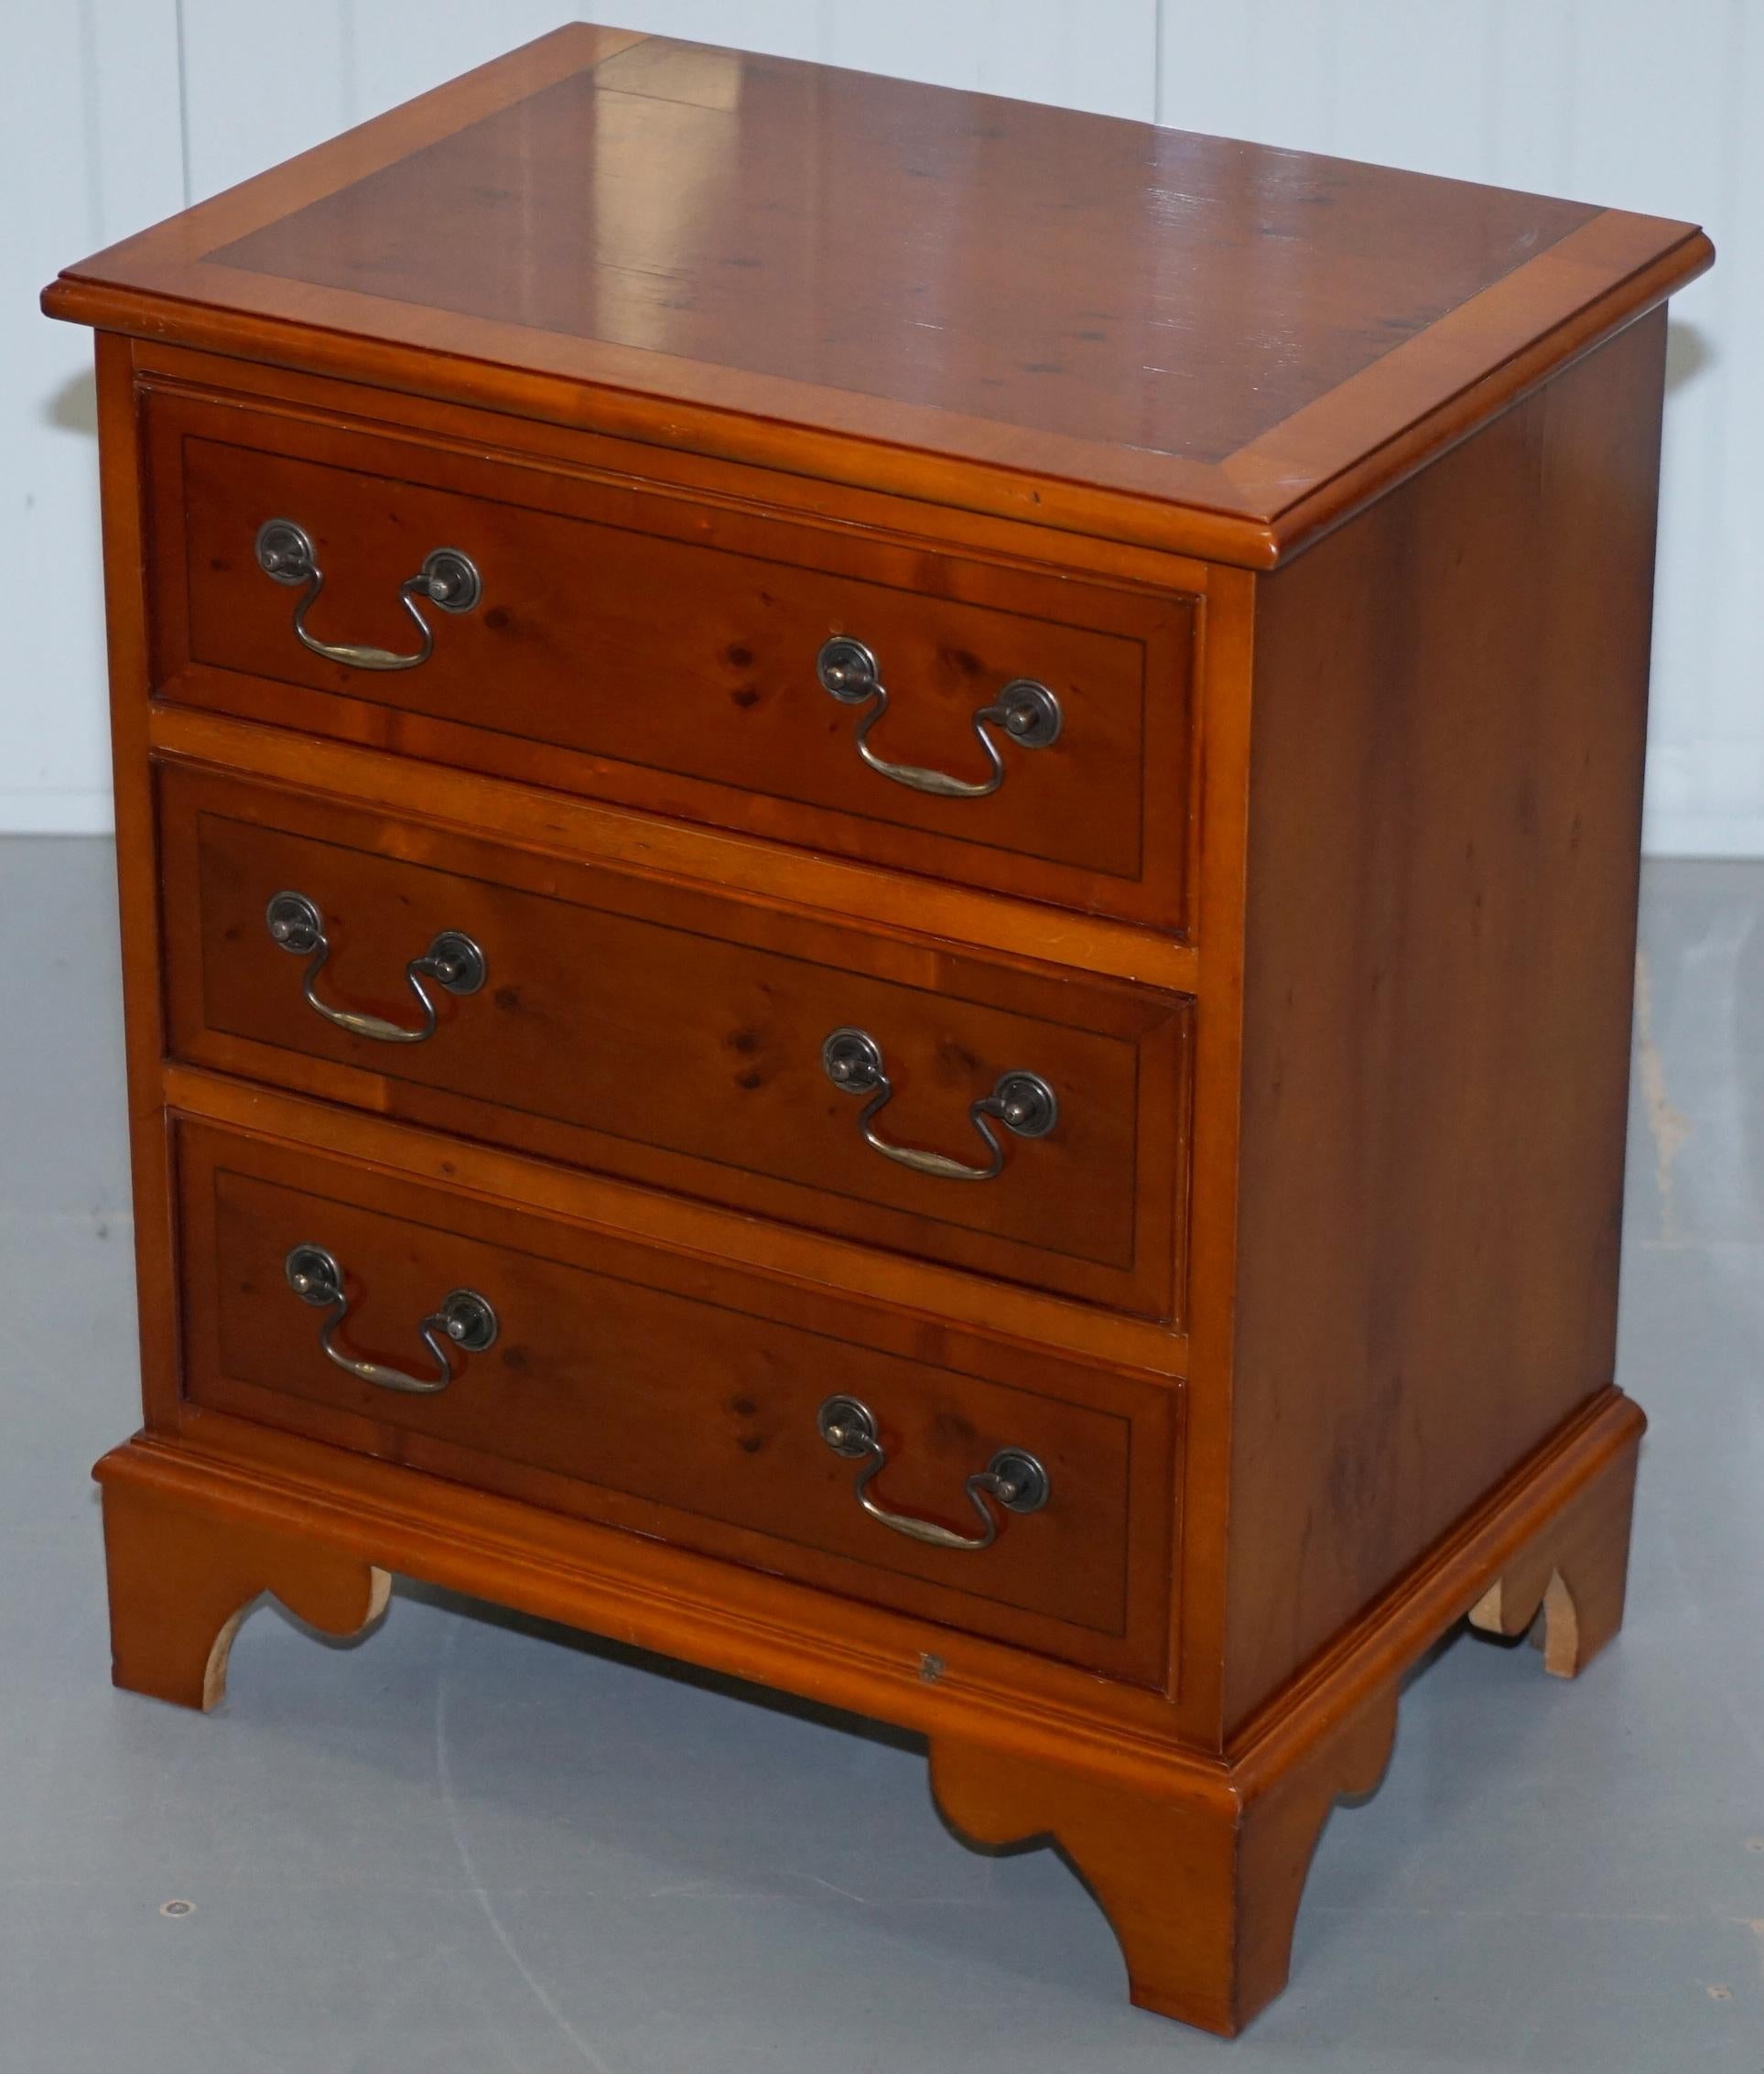 Regency Small Burr Yew Wood Side Table Sized Chest of Drawers Great for Office Home Bed